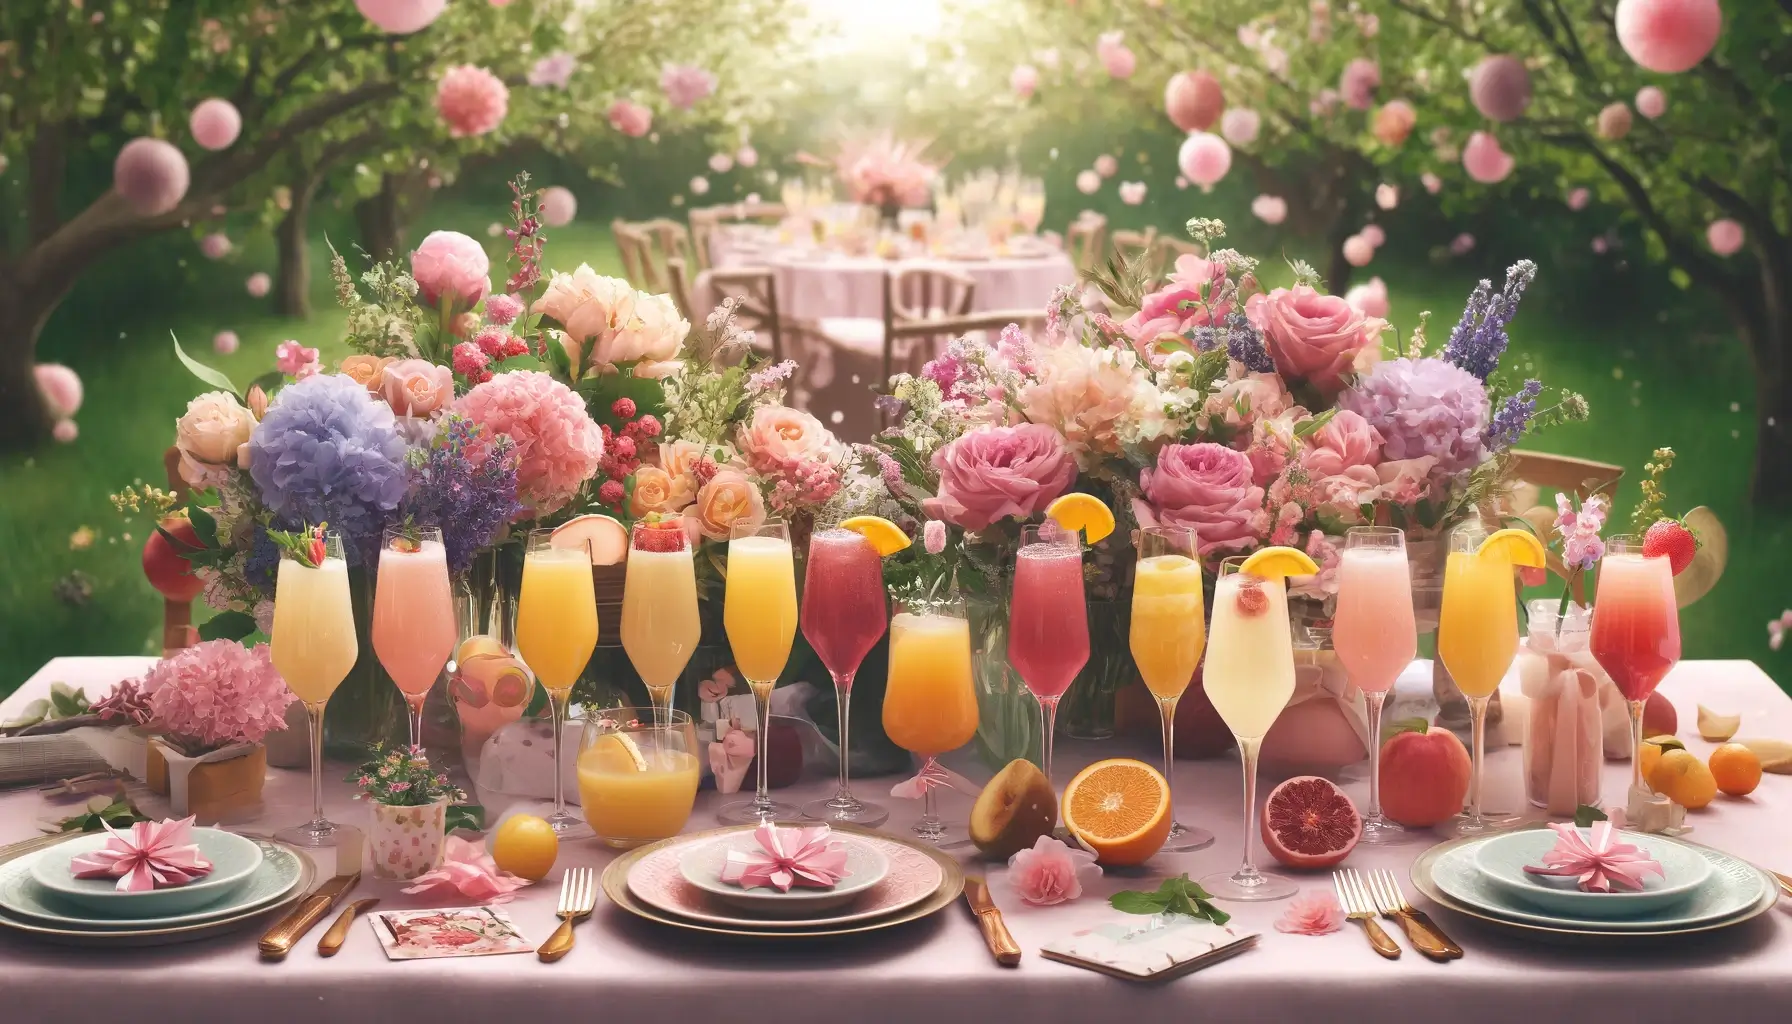 The setting includes a table set outdoors with a beautiful garden backdrop, decorated with abundant spring flowers and pastel colors, and featuring champagne flutes filled with variously colored mimosas. Small touches like Mother's Day cards and pink ribbons enhance the festive and maternal theme.